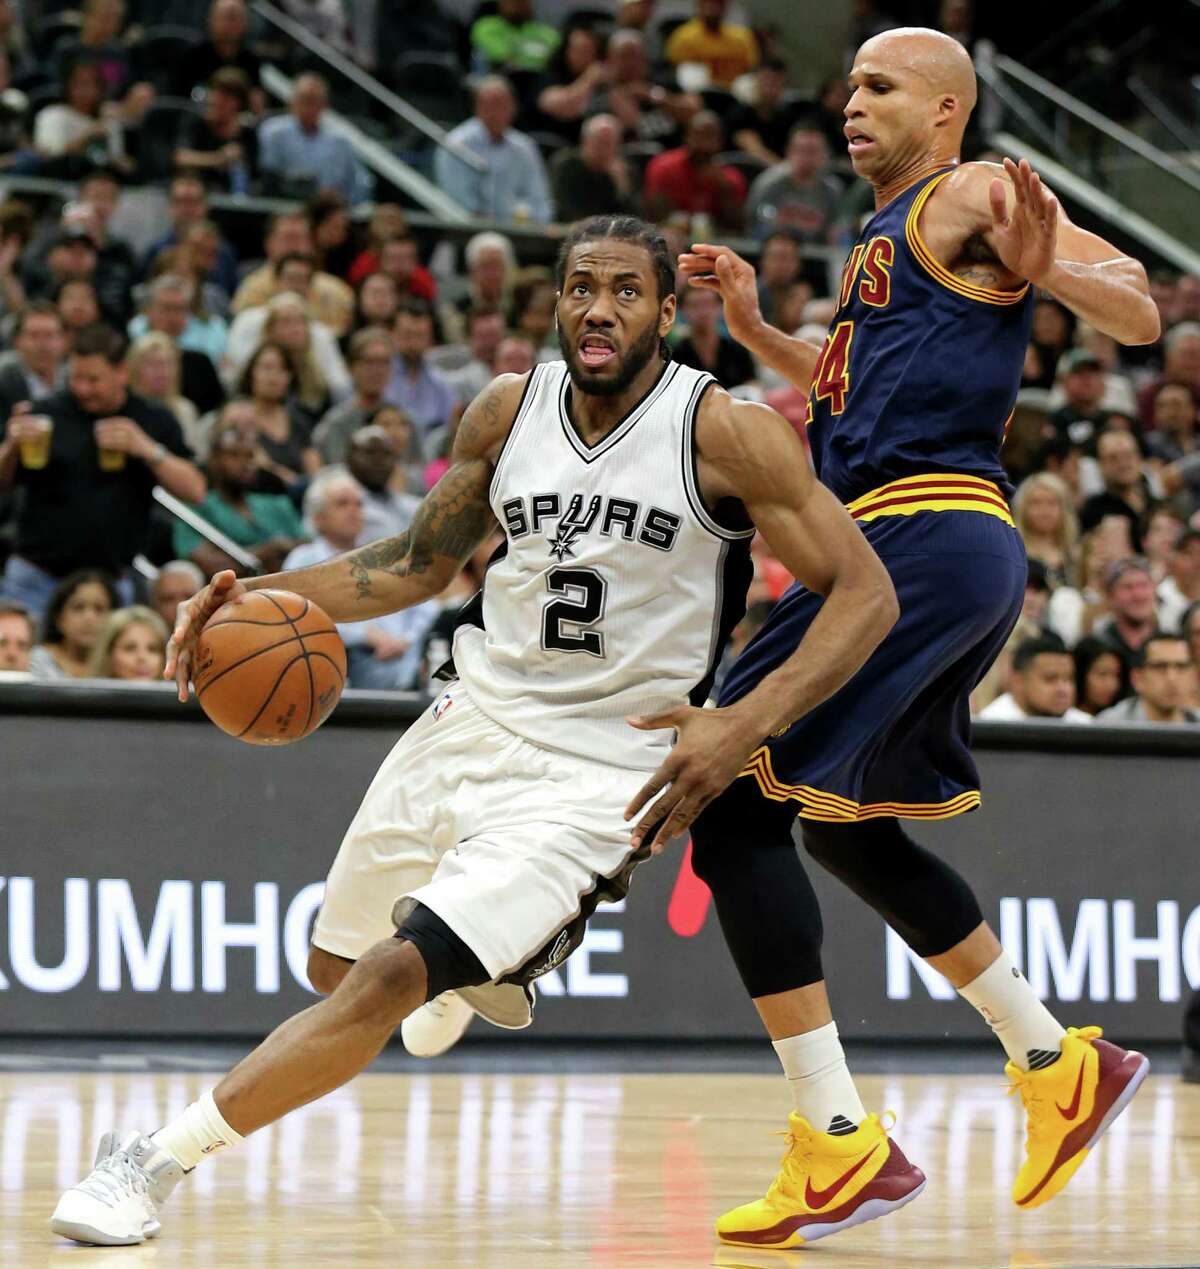 San Antonio Spurs' Kawhi Leonard drives around Cleveland Cavaliers' Richard Jefferson during first half action Monday March 27, 2017 at the AT&T Center.